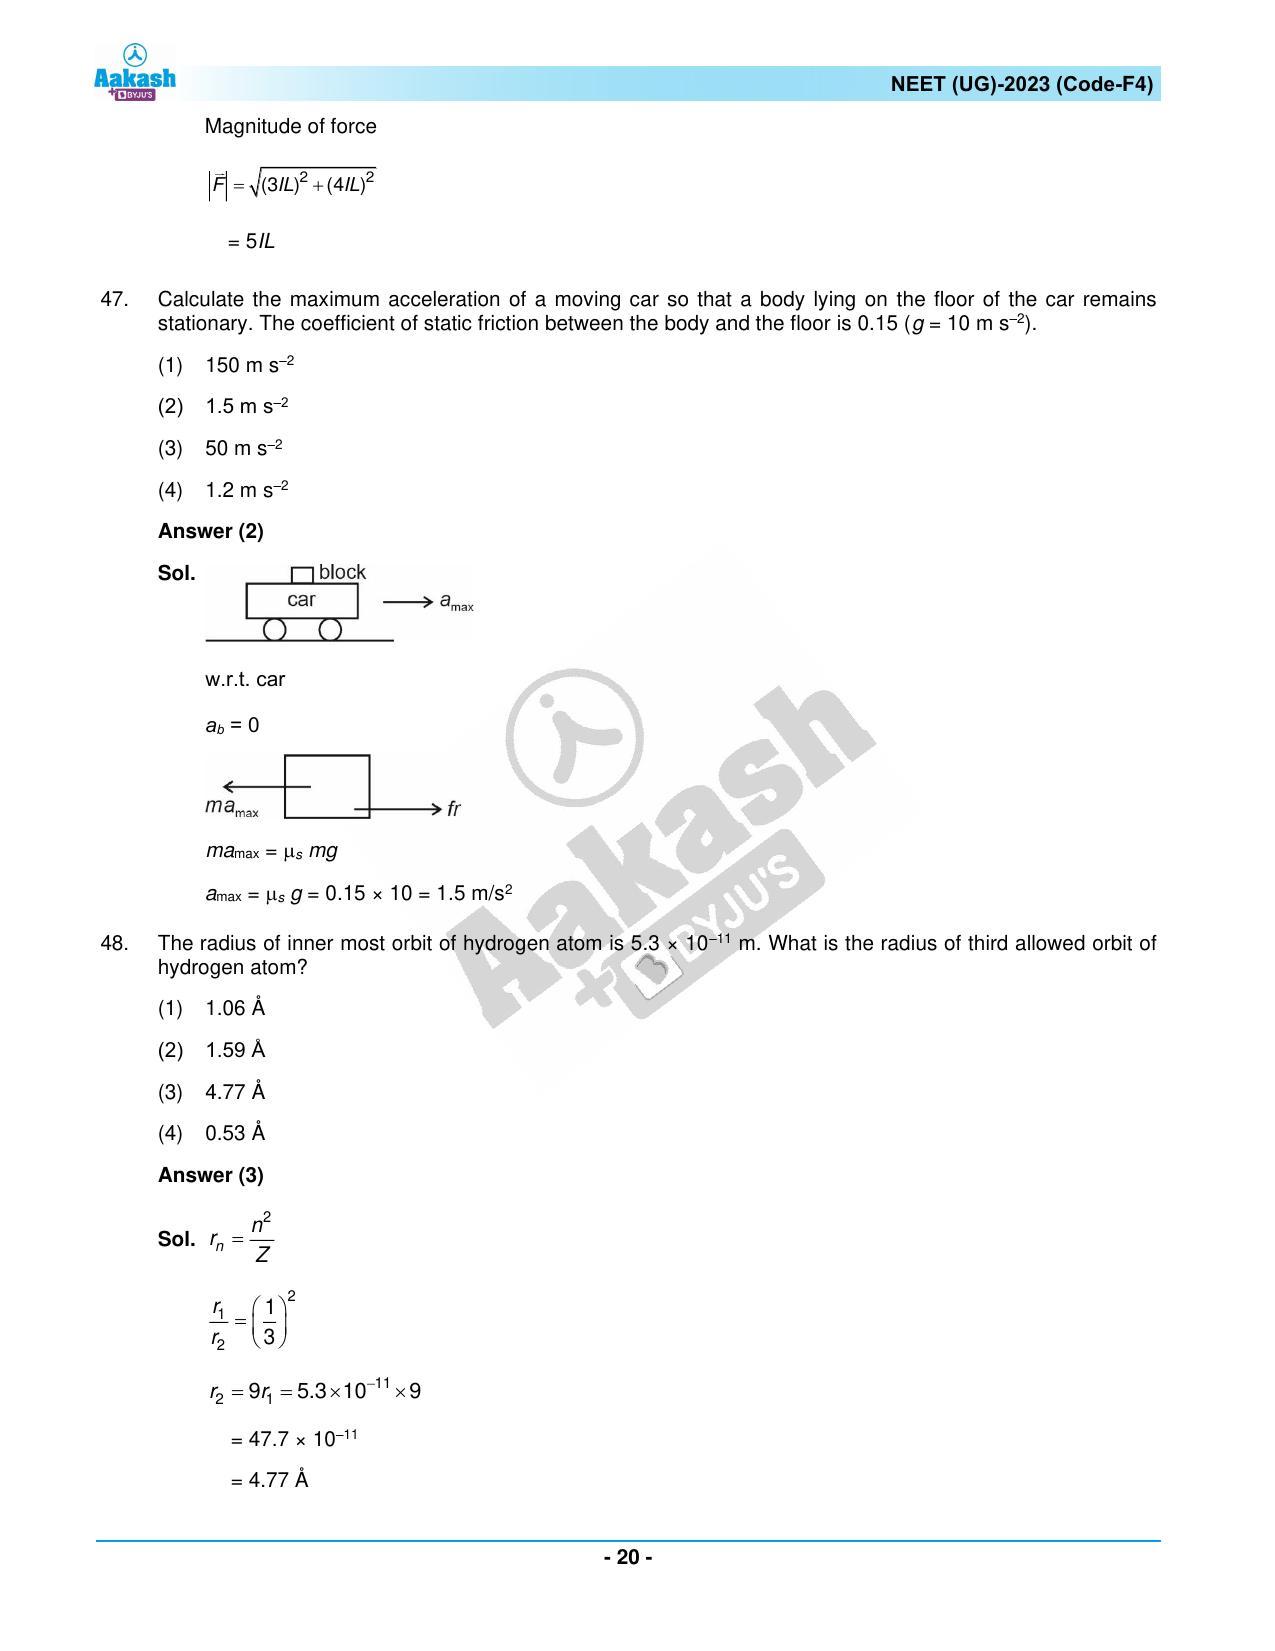 NEET 2023 Question Paper F4 - Page 20